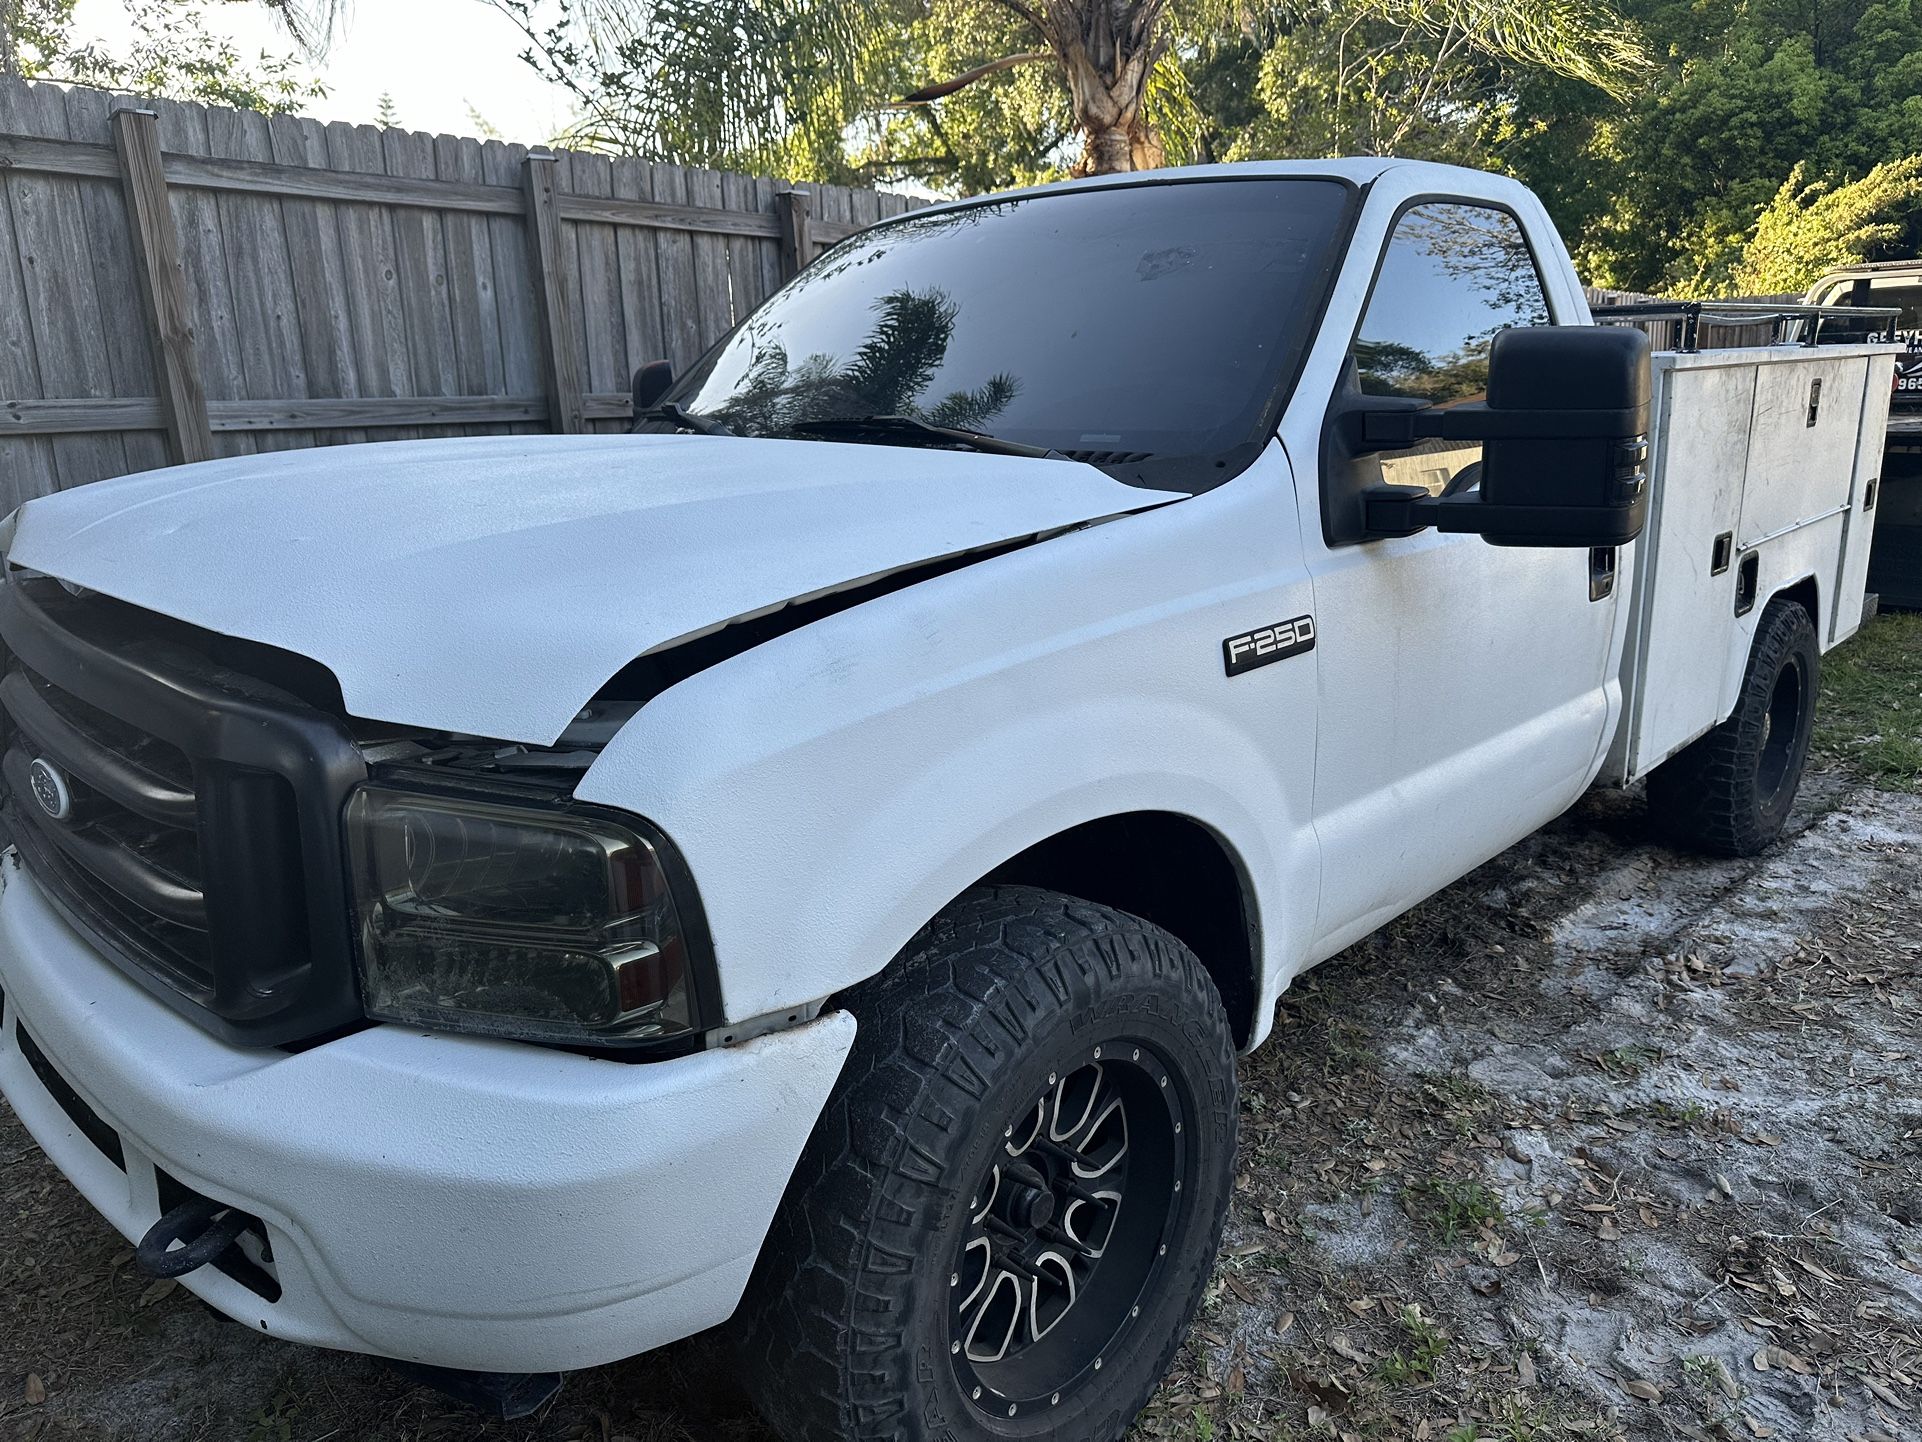 2002 Ford F250 Utility Parts (parting out)